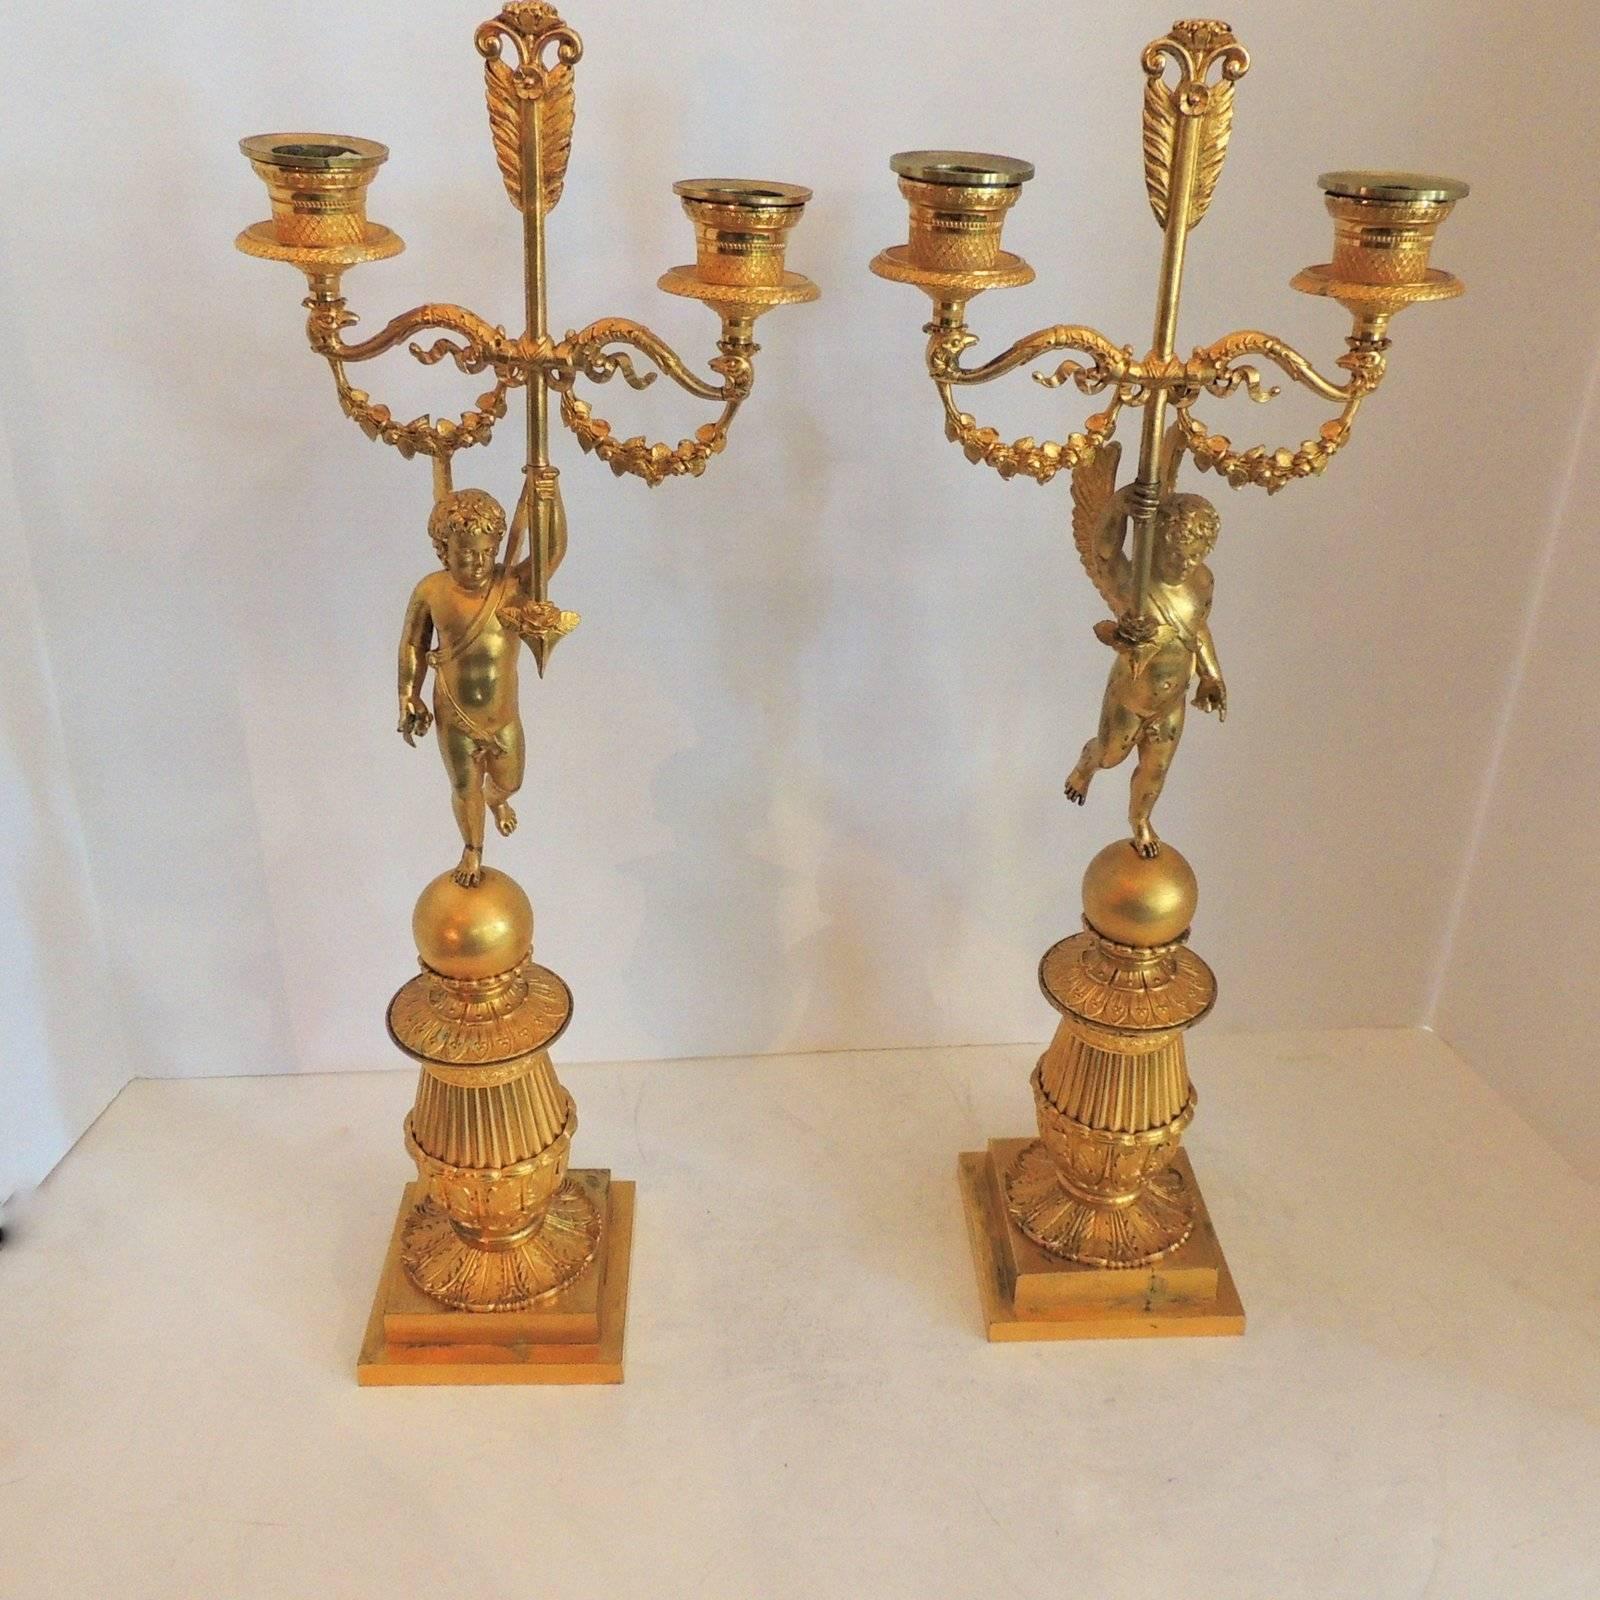 Wonderful Pair Dore Bronze Two-Arm Winged Putti Cherub Neoclassical Candelabras For Sale 2